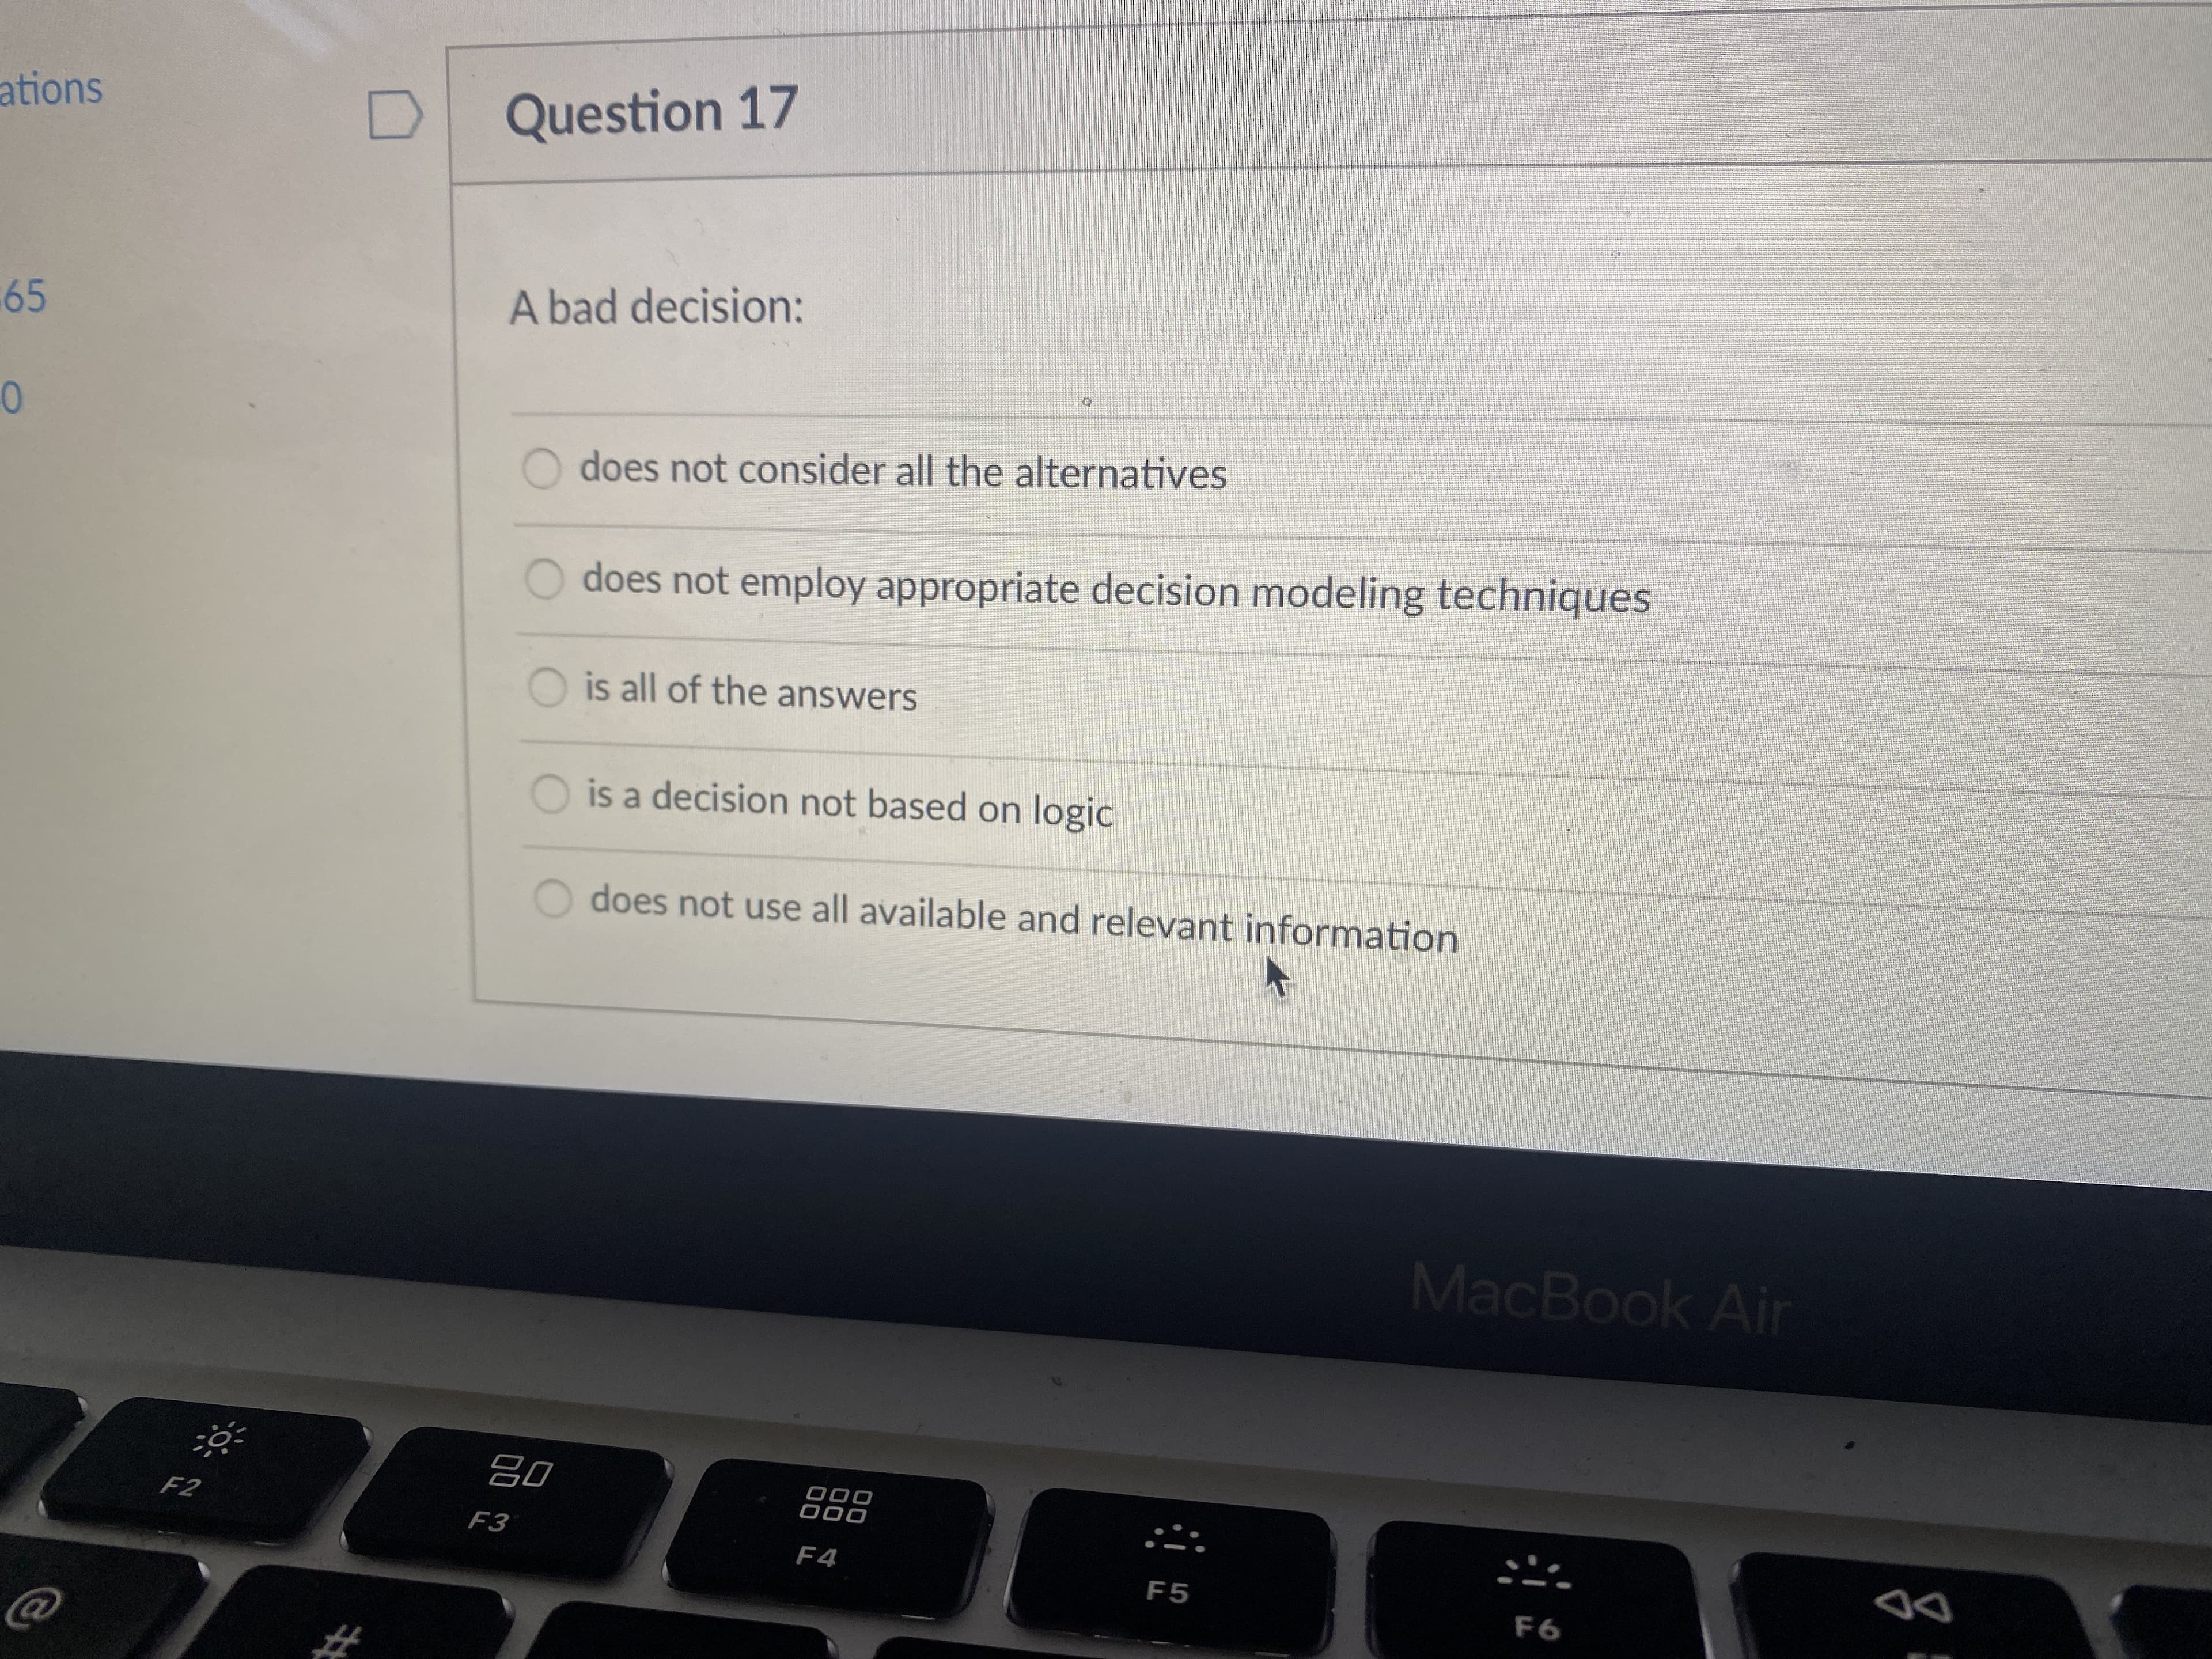 Question 17
ations
A bad decision:
65
0
O does not consider all the alternatives
O does not employ appropriate decision modeling techniques
O is all of the answers
O is a decision not based on logic
does not use all available and relevant information
MacBook Air
000
F3
000
F4
F5
DD
%23
